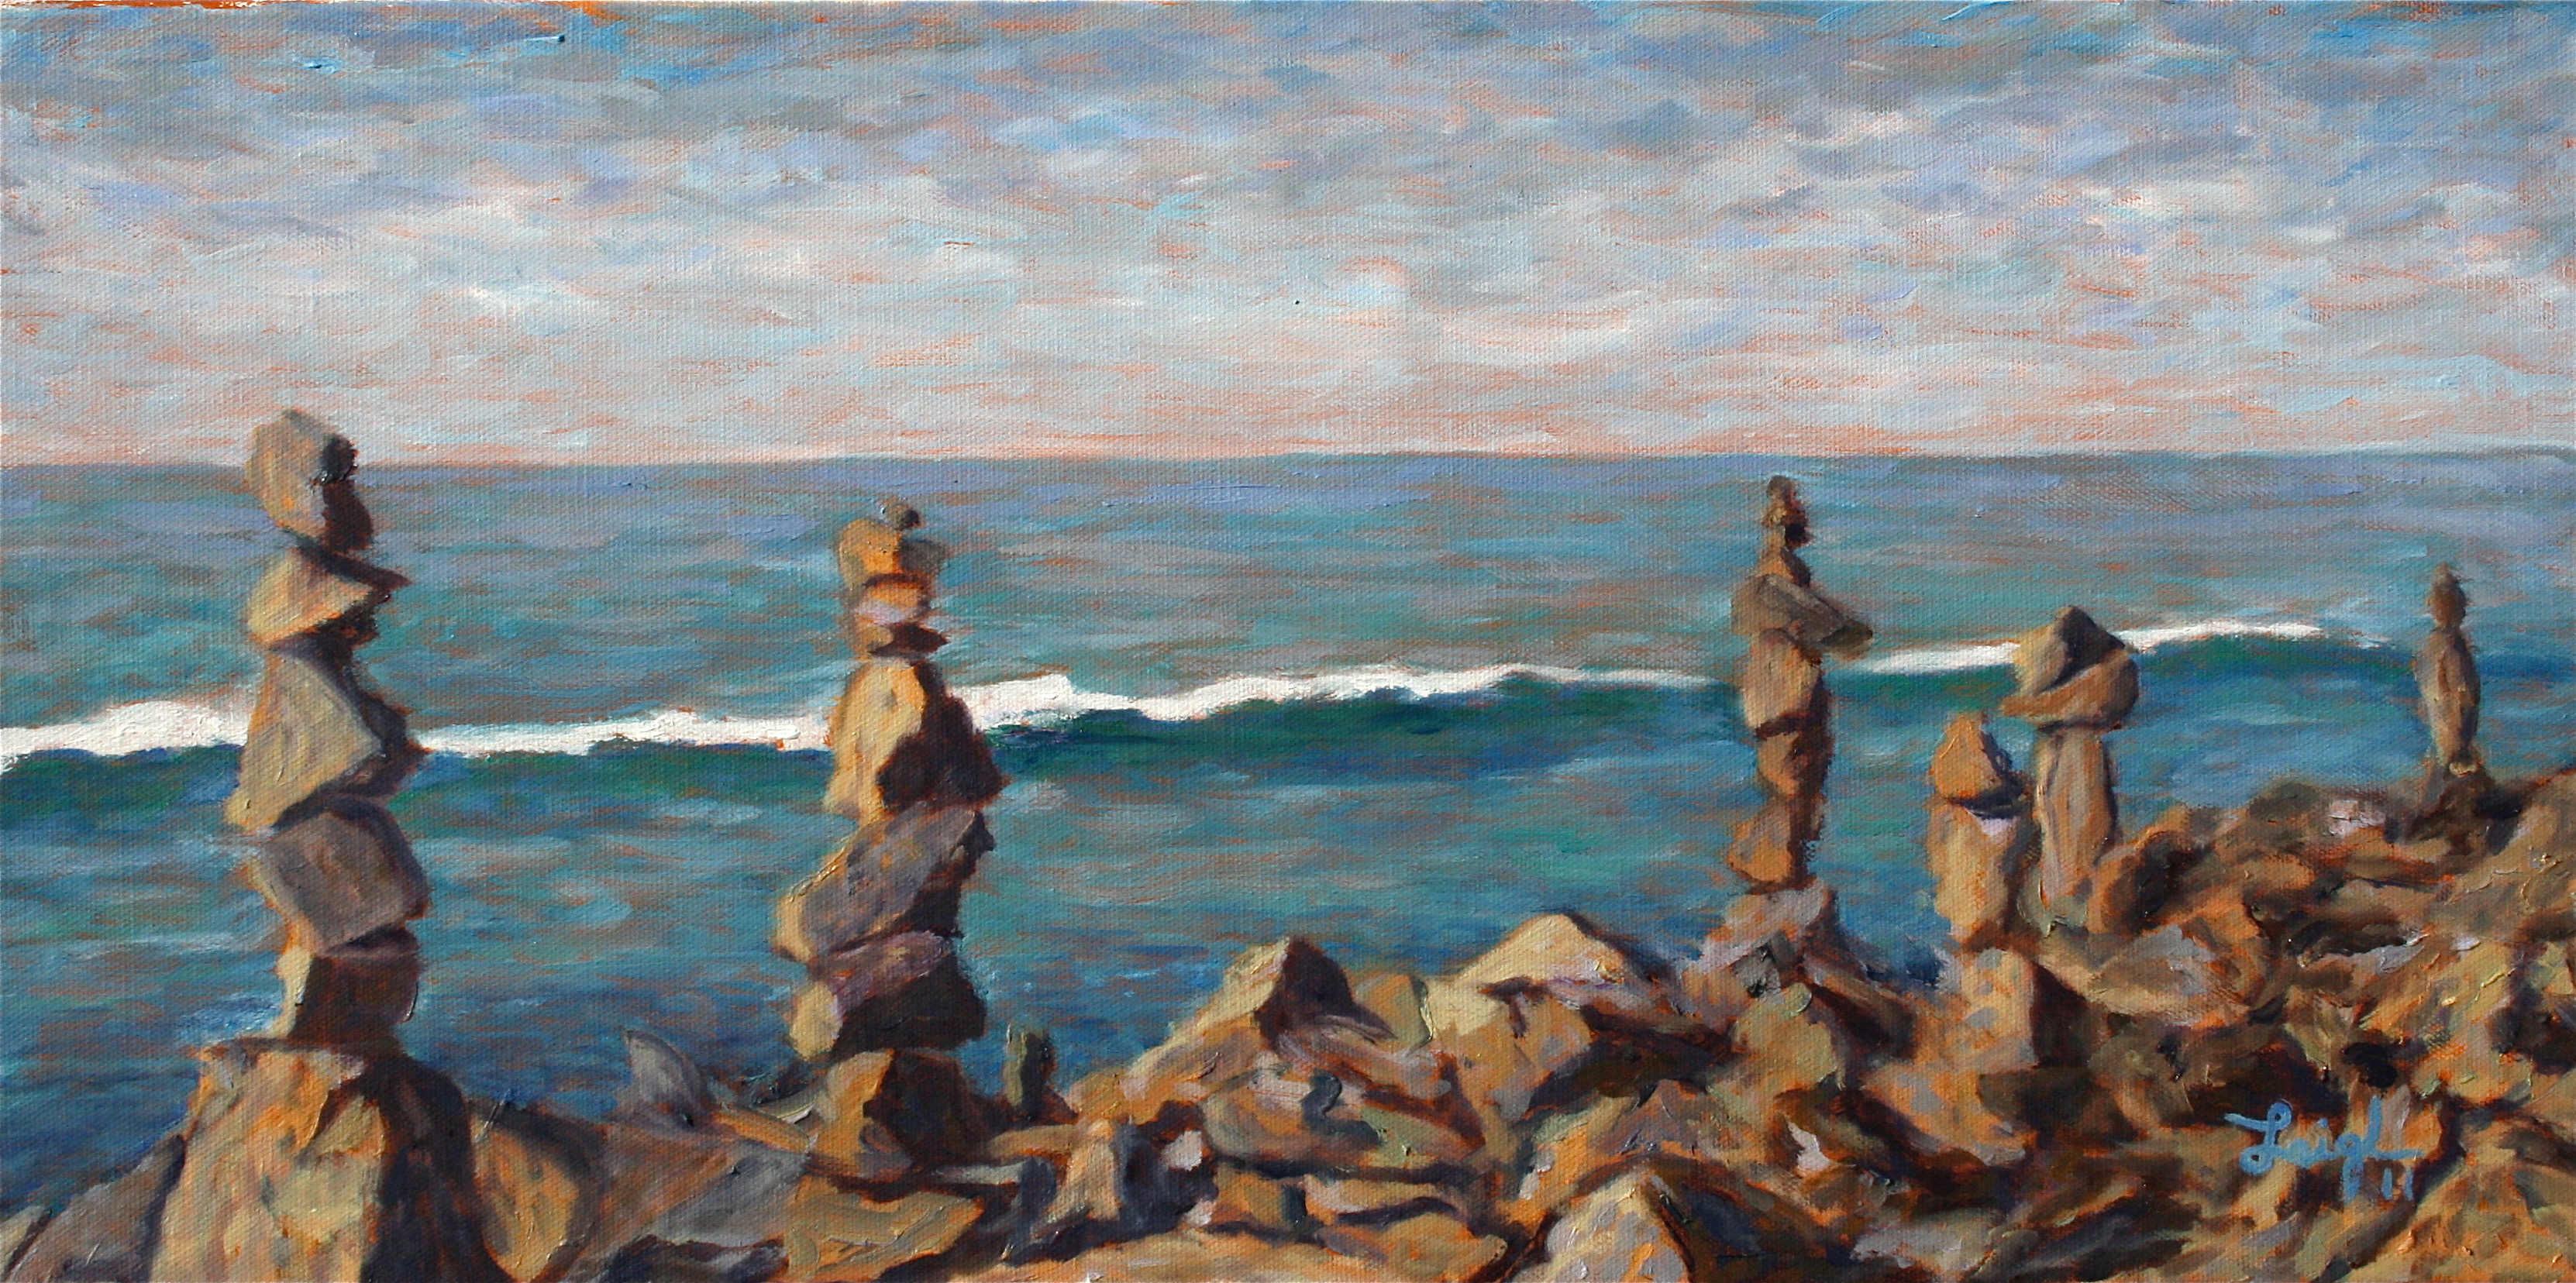 Rocks and Wave  ~  
George and Holly Moyer, Carlsbad, CA
2011 • 24 x 12